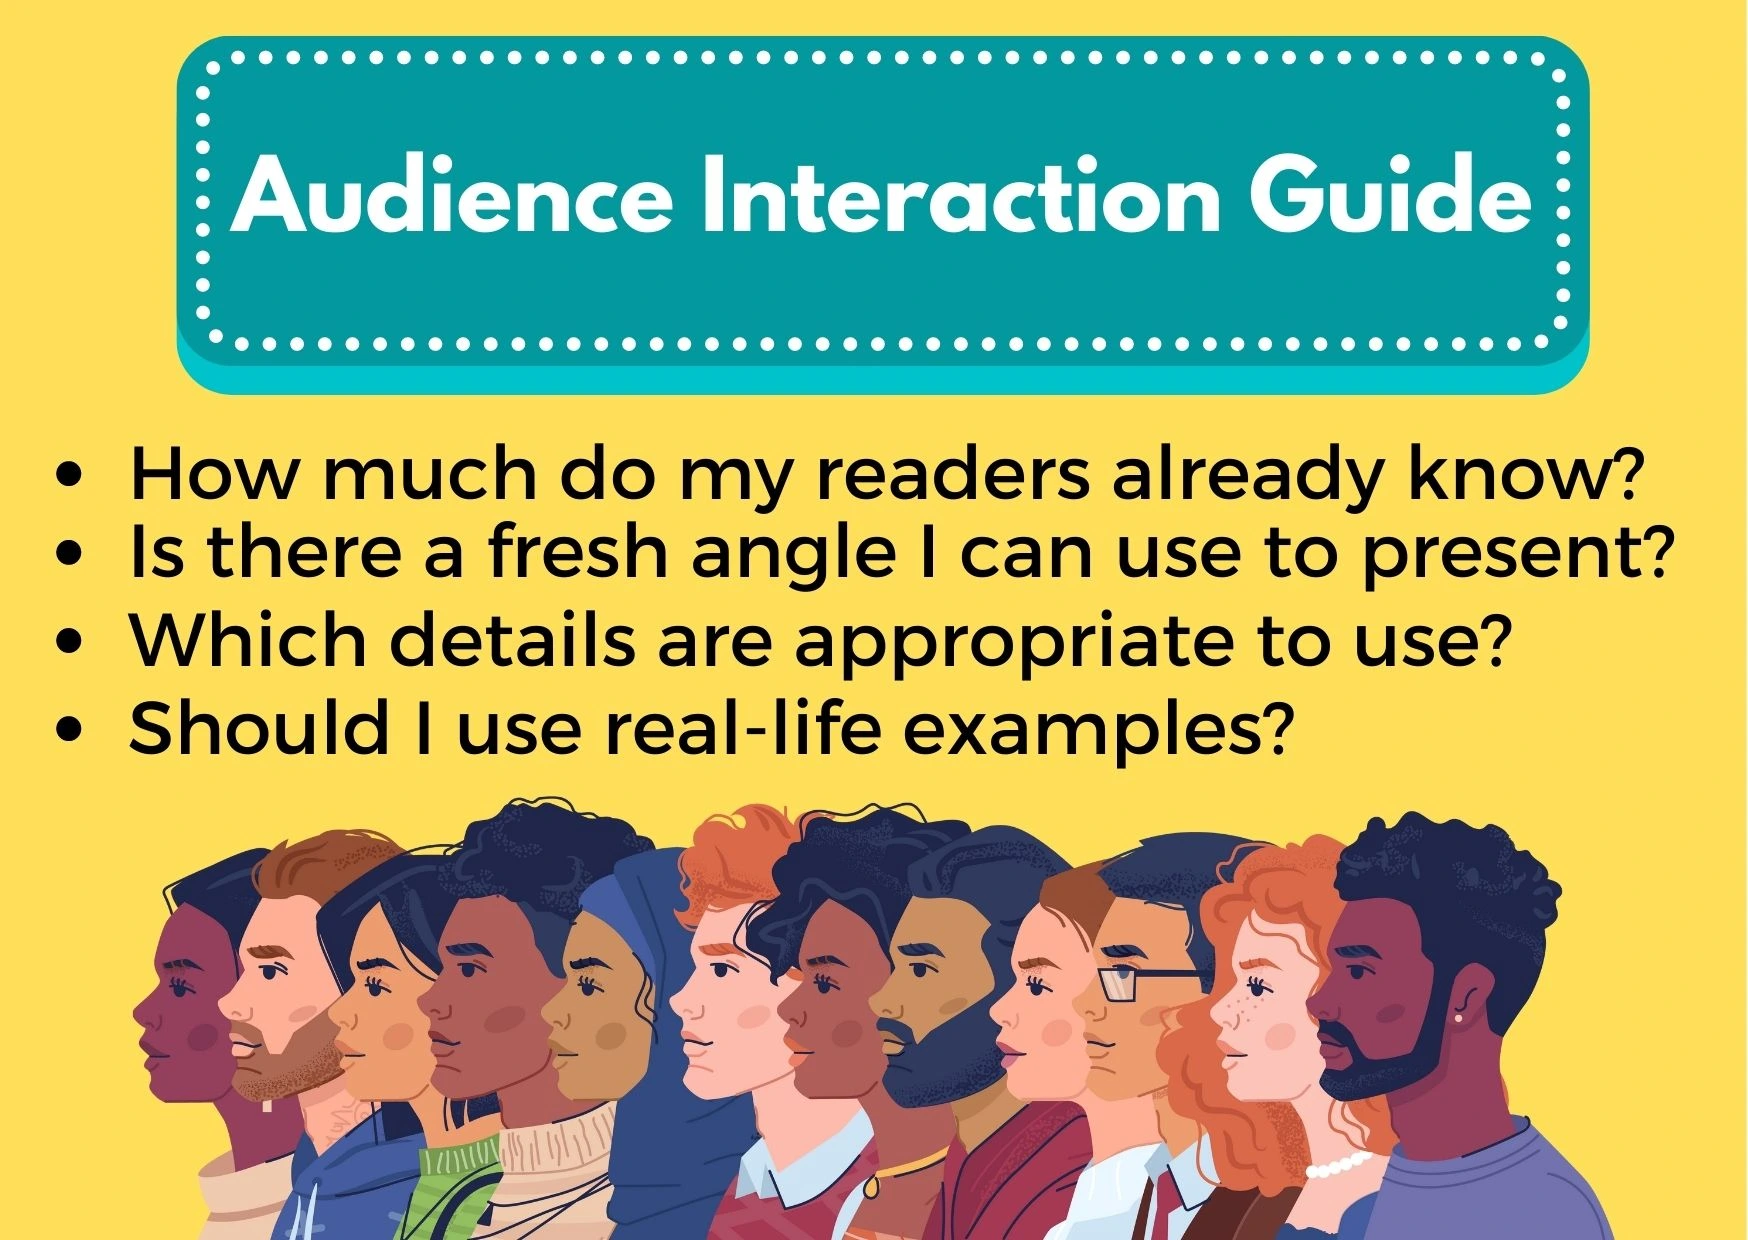 A graphic with questions meant to be an audience interaction guide.